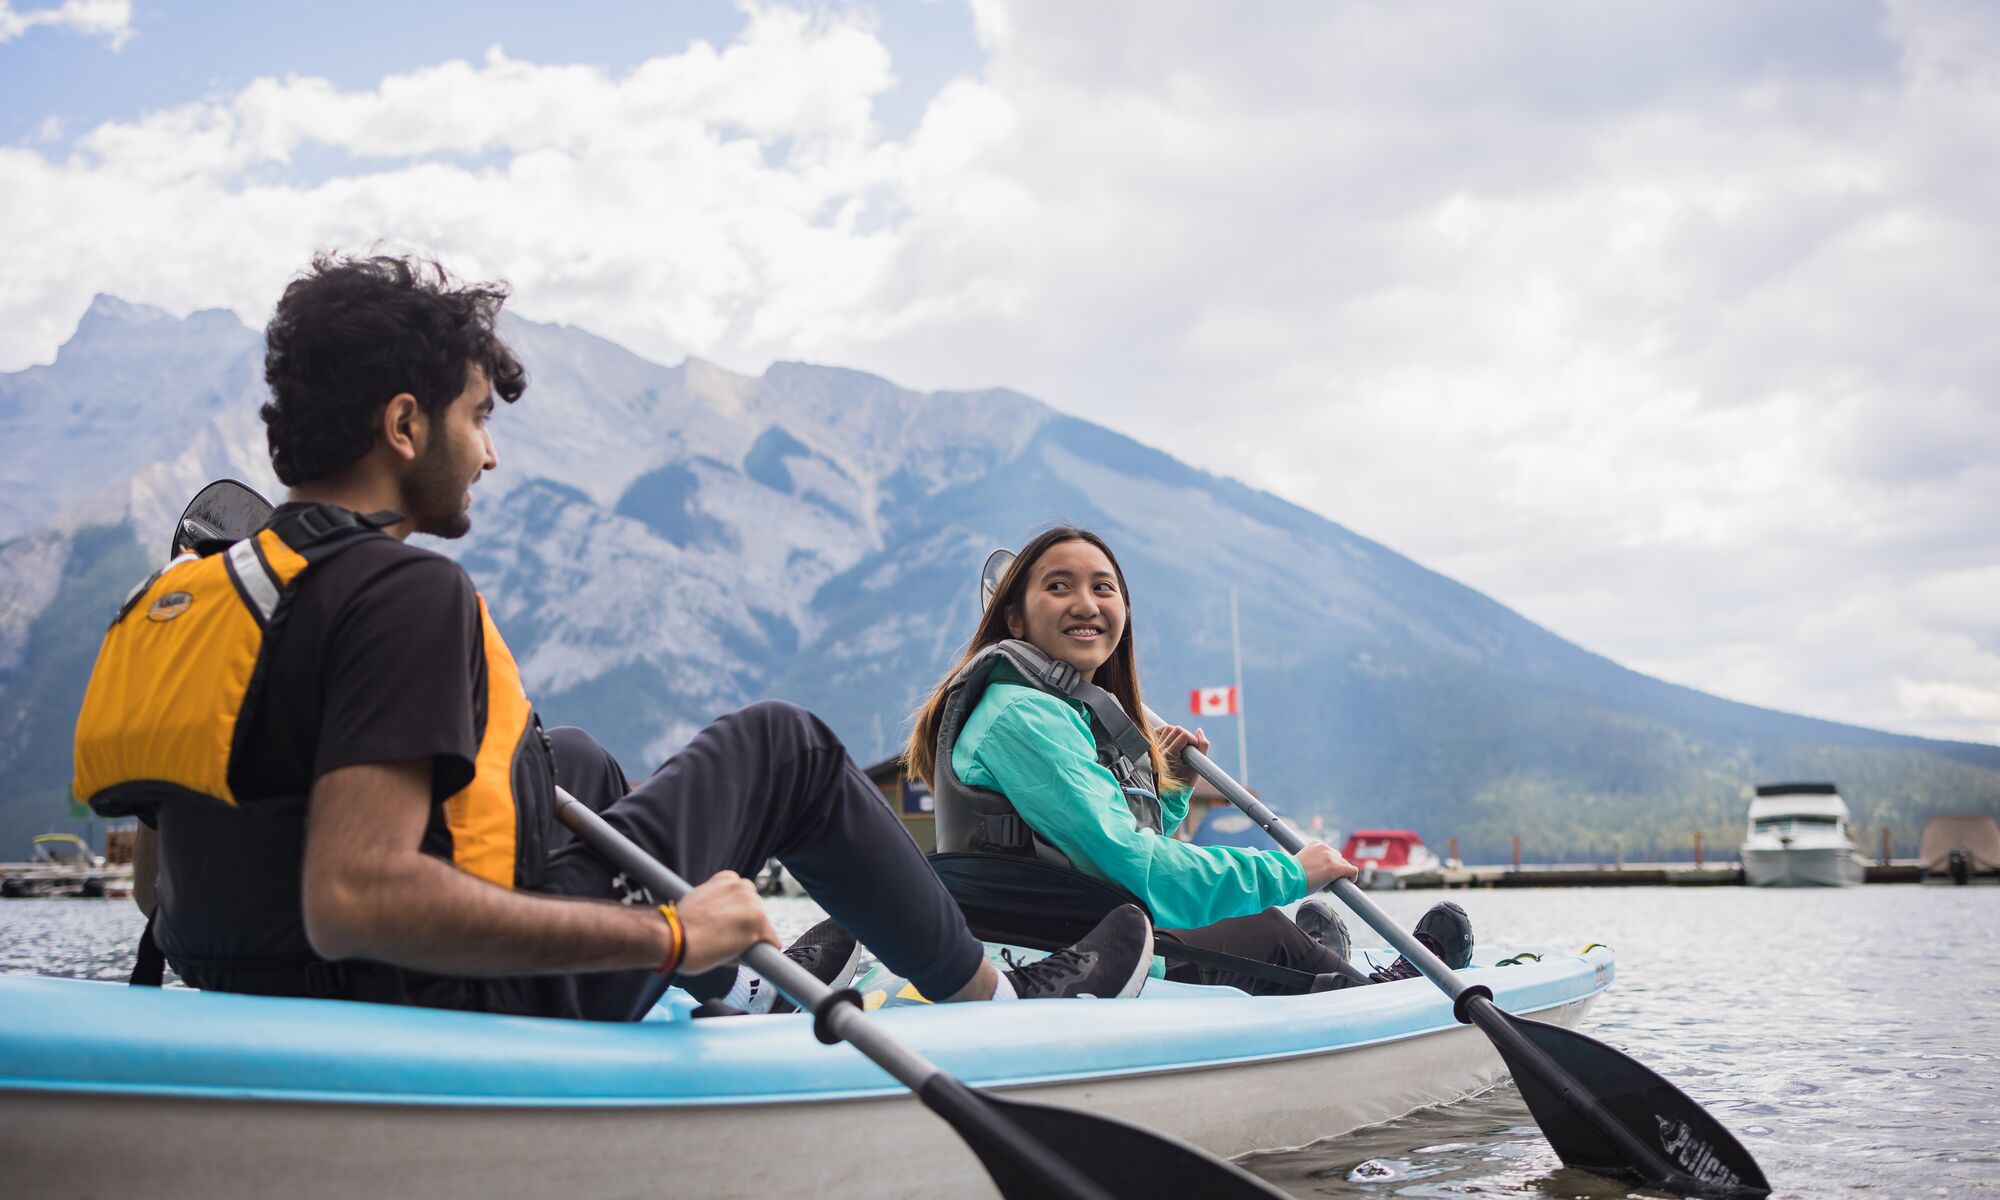 Two people in a tandem kayak in Banff National Park on Lake Minnewanka.